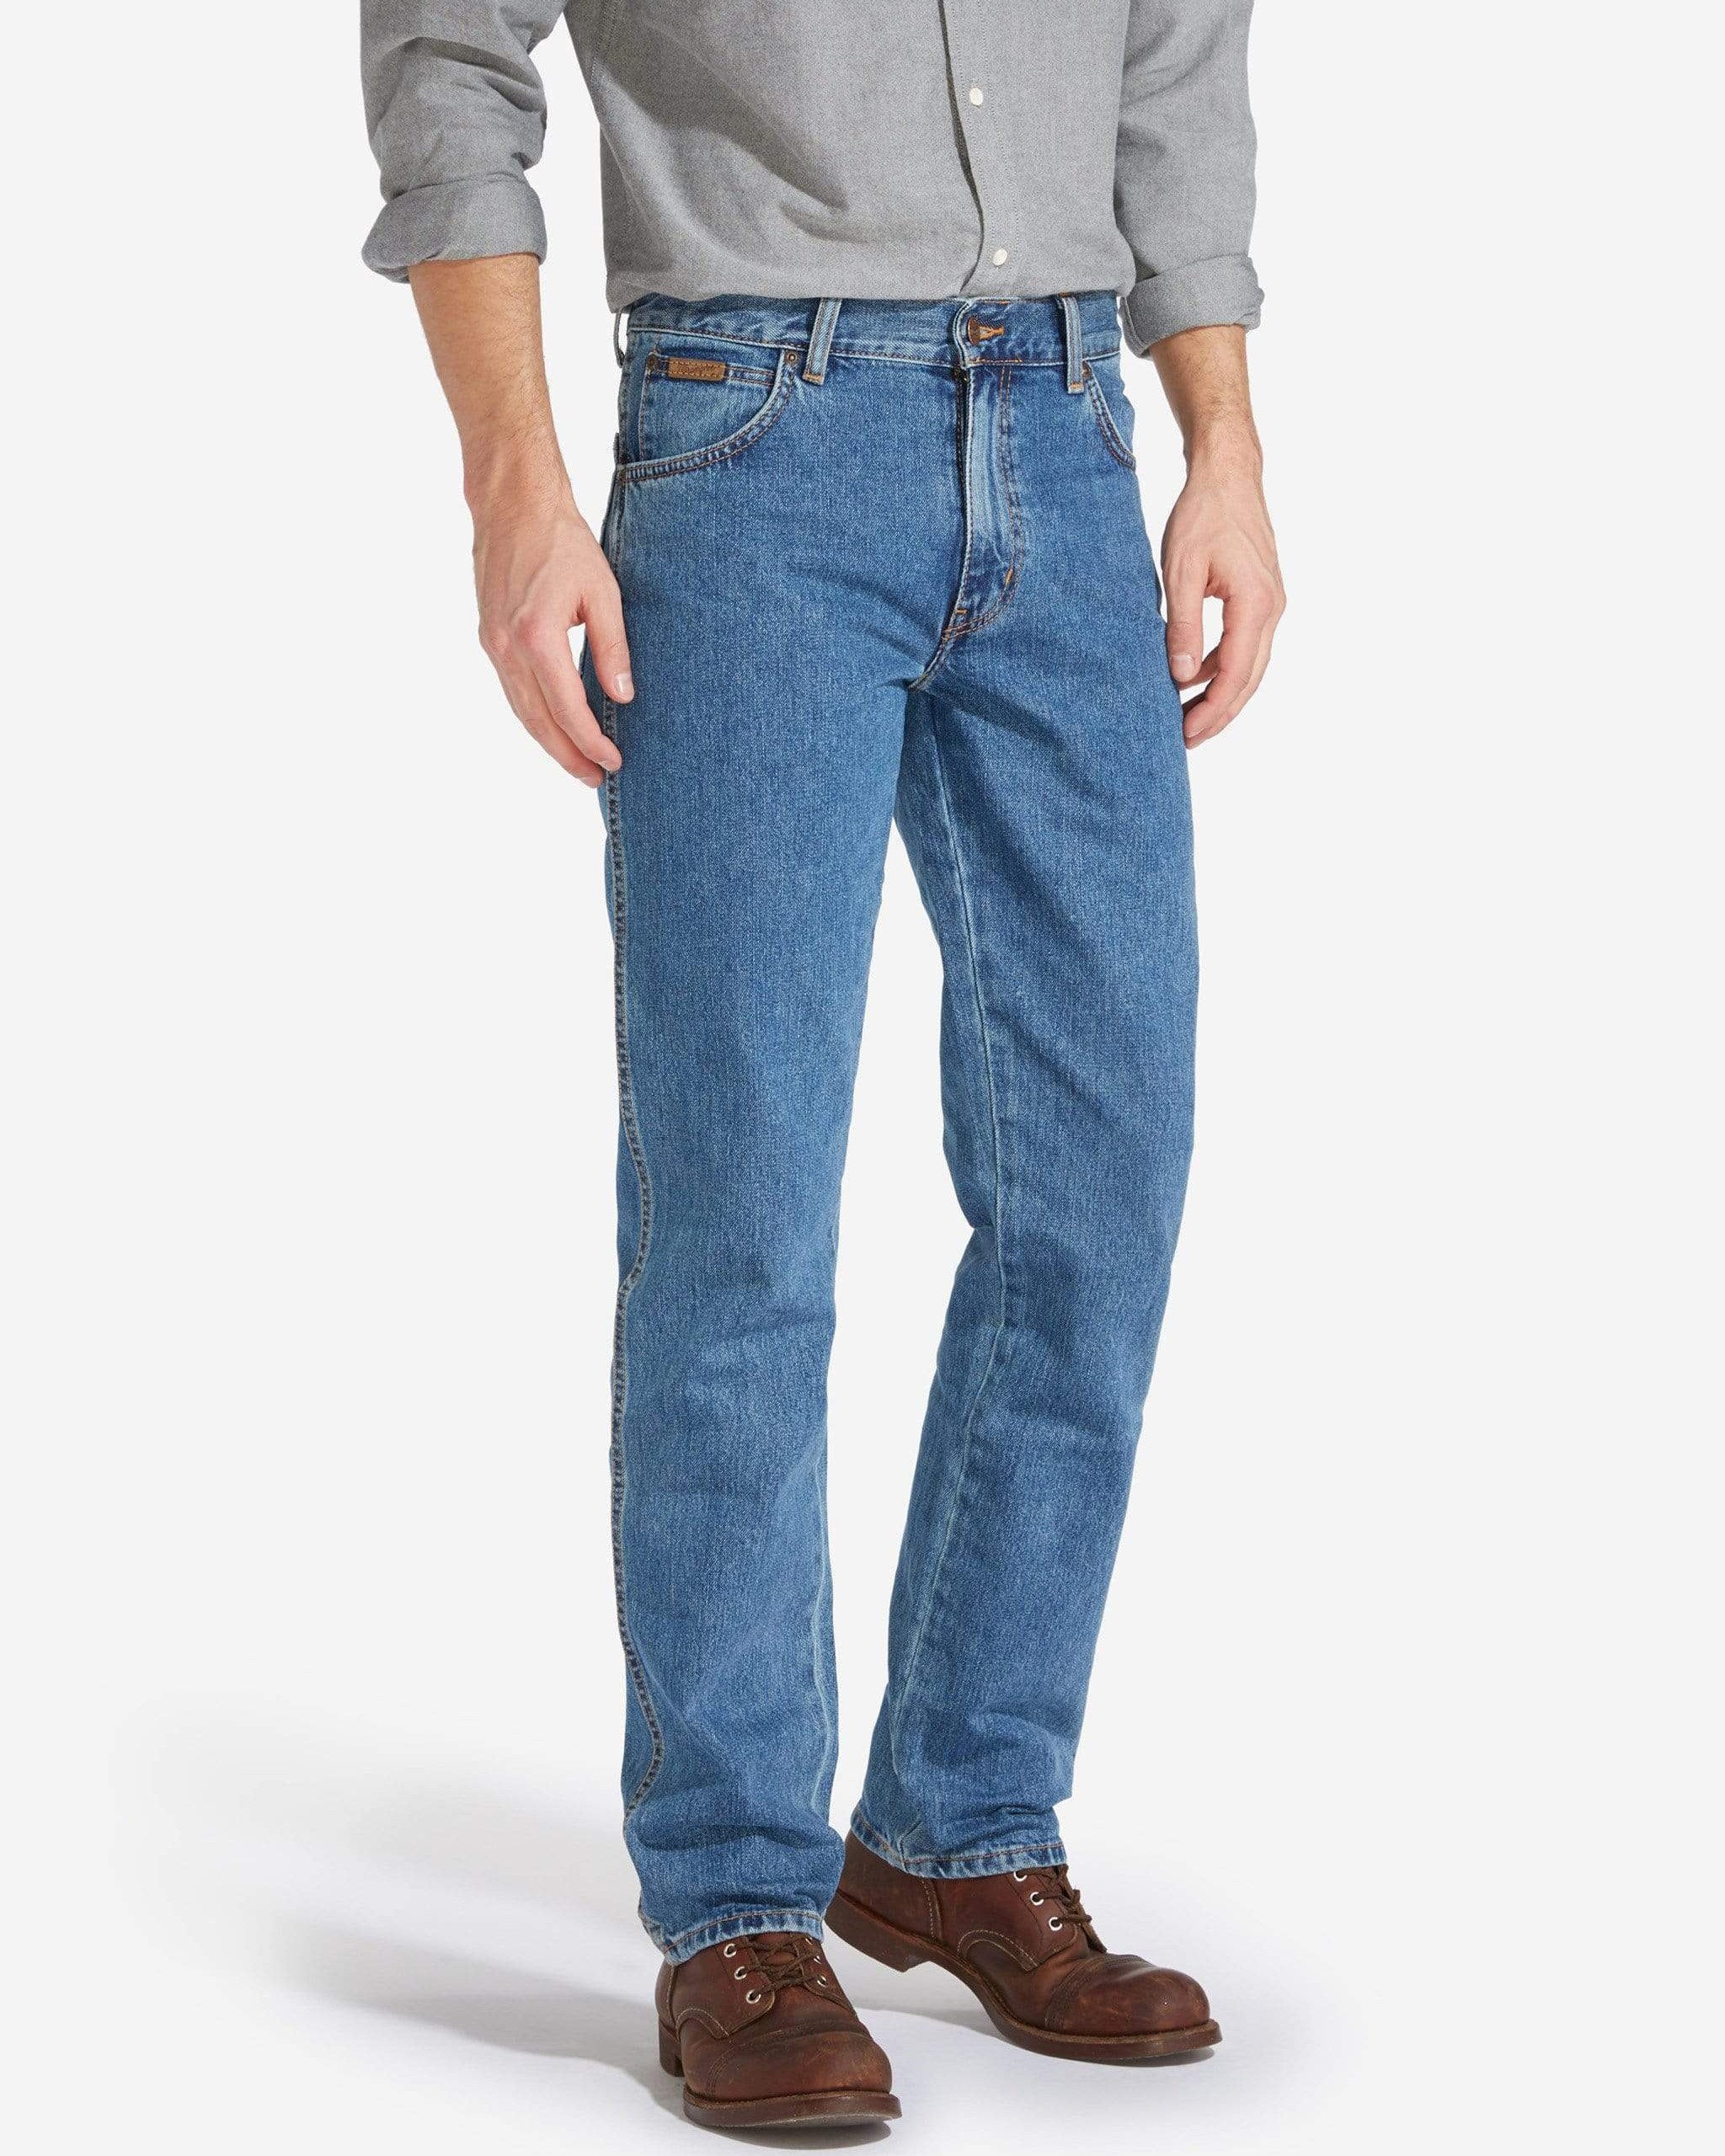 Buy REX STRAUT JEANS Mens Slim Fit Stone Wash Jeans | Shoppers Stop